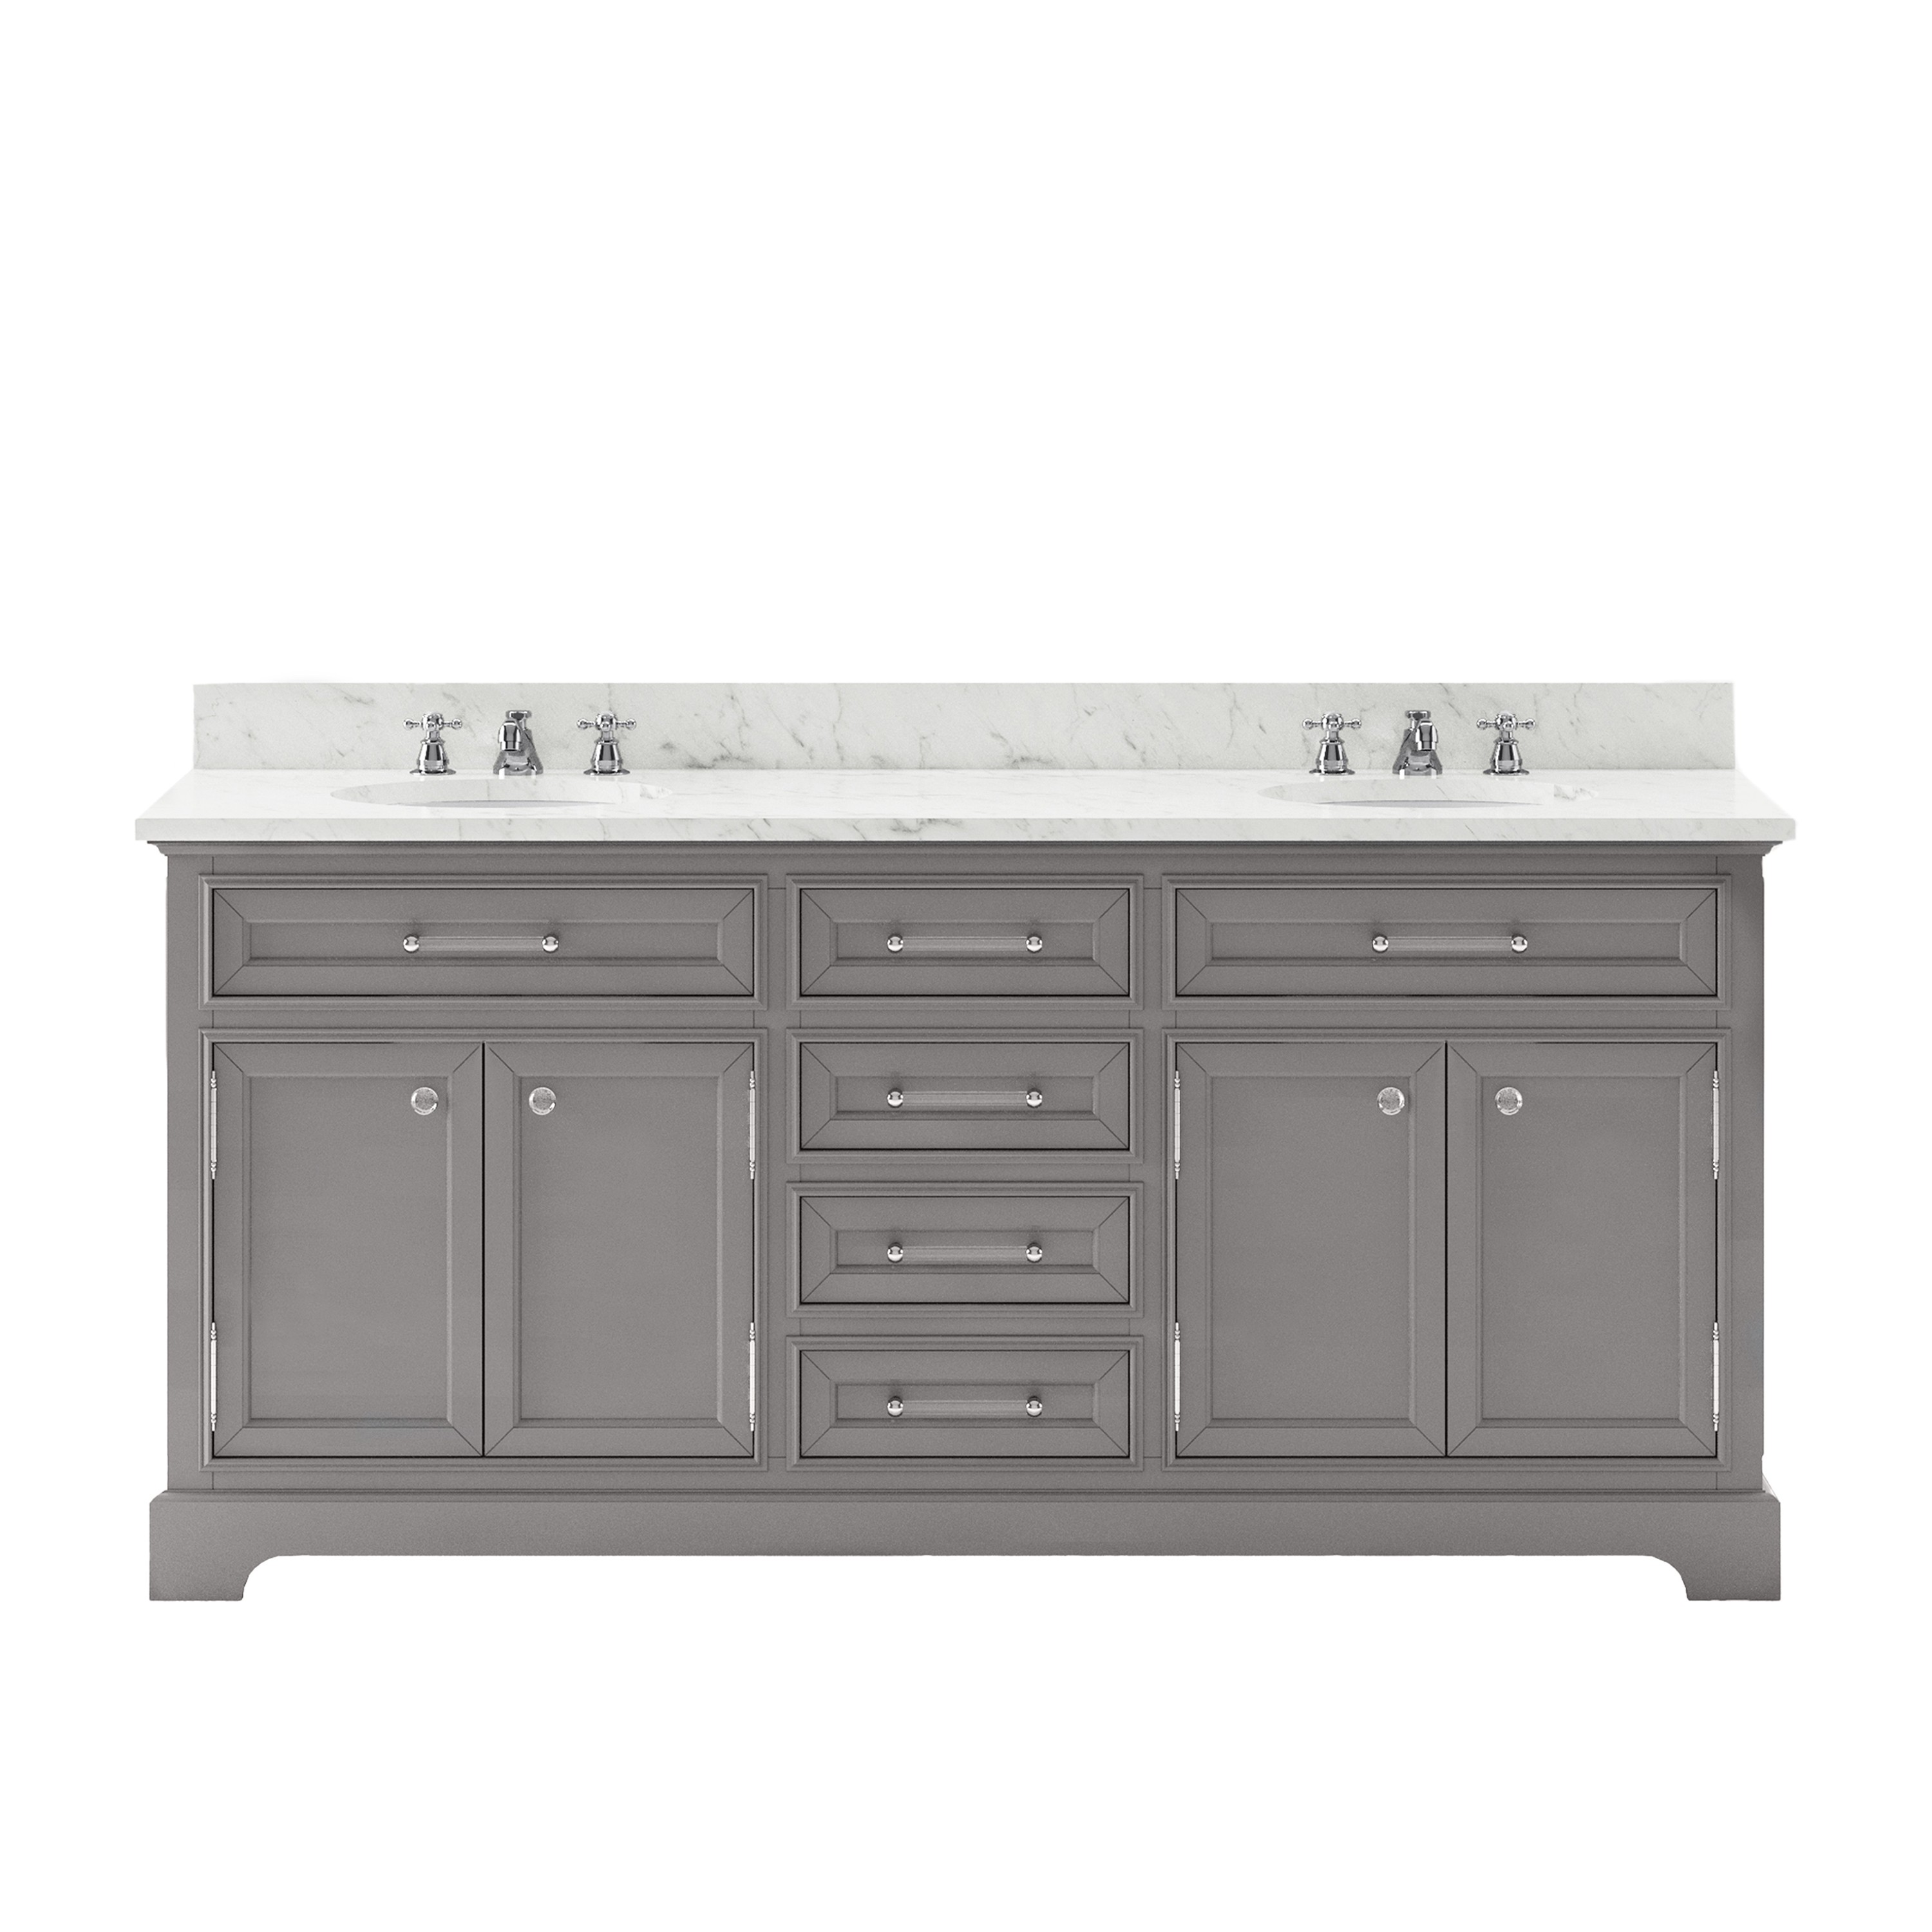 WATER-CREATION DE72CW01CG-000BX0901 DERBY 72 INCH CASHMERE GREY DOUBLE SINK BATHROOM VANITY WITH FAUCET